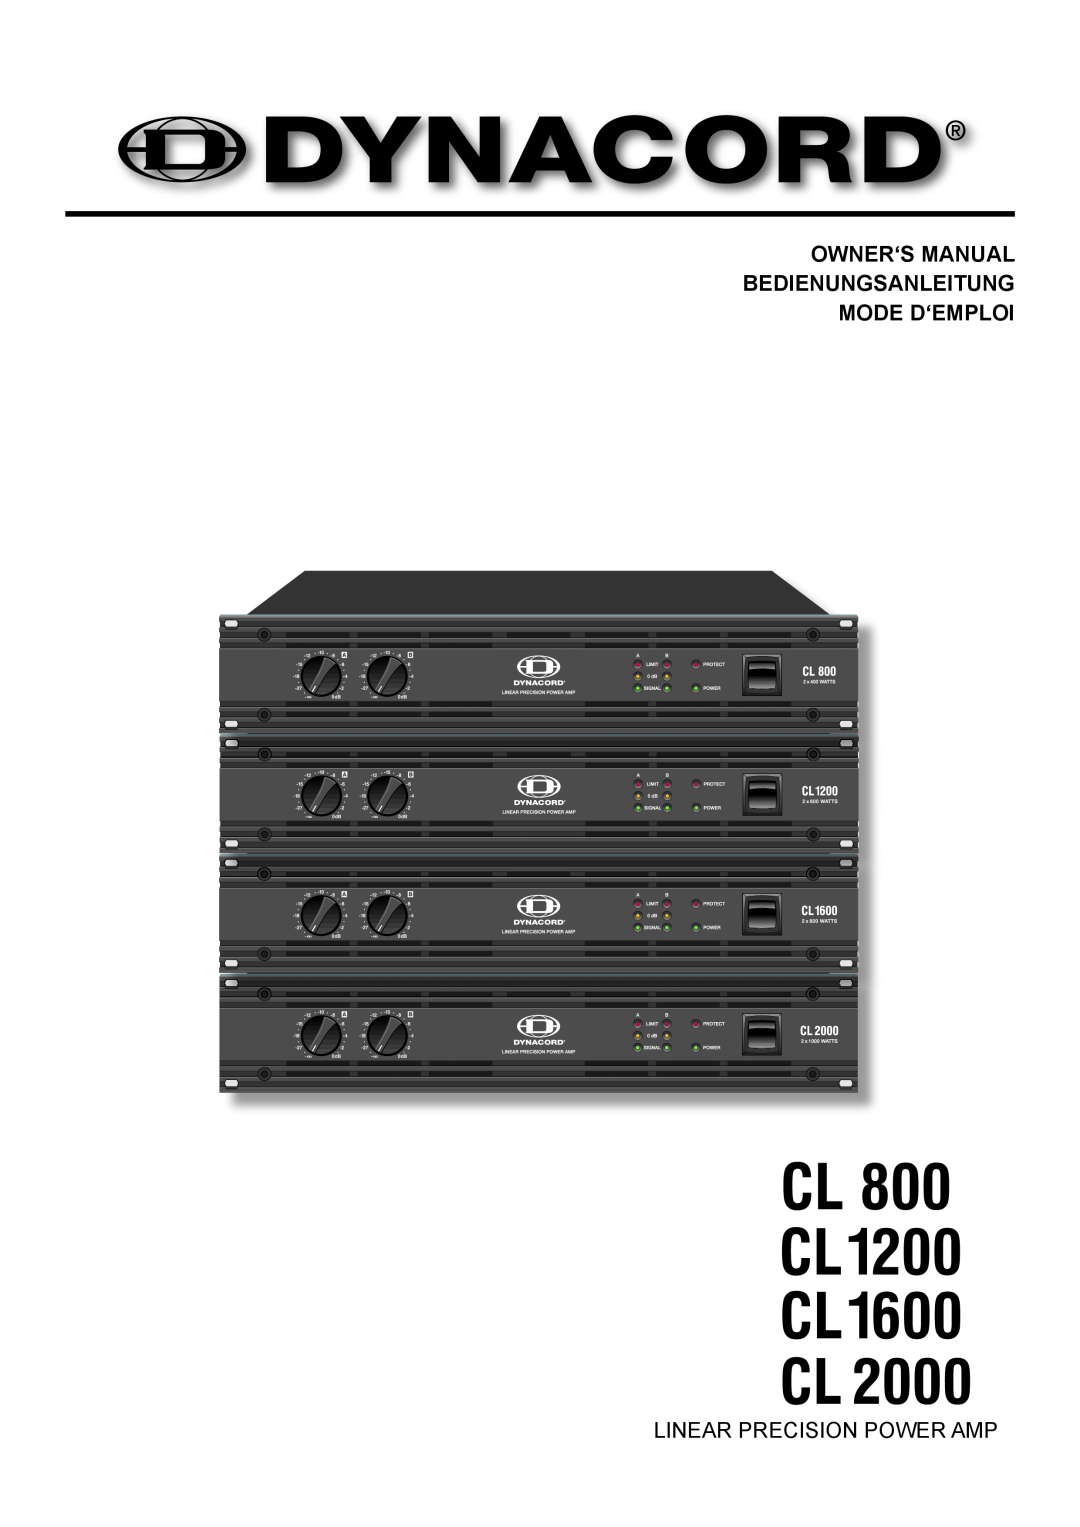 Dynacord CL 800 owner manual Owner‘S Manual Bedienungsanleitung Mode D‘Emploi, Linear Precision Power Amp 